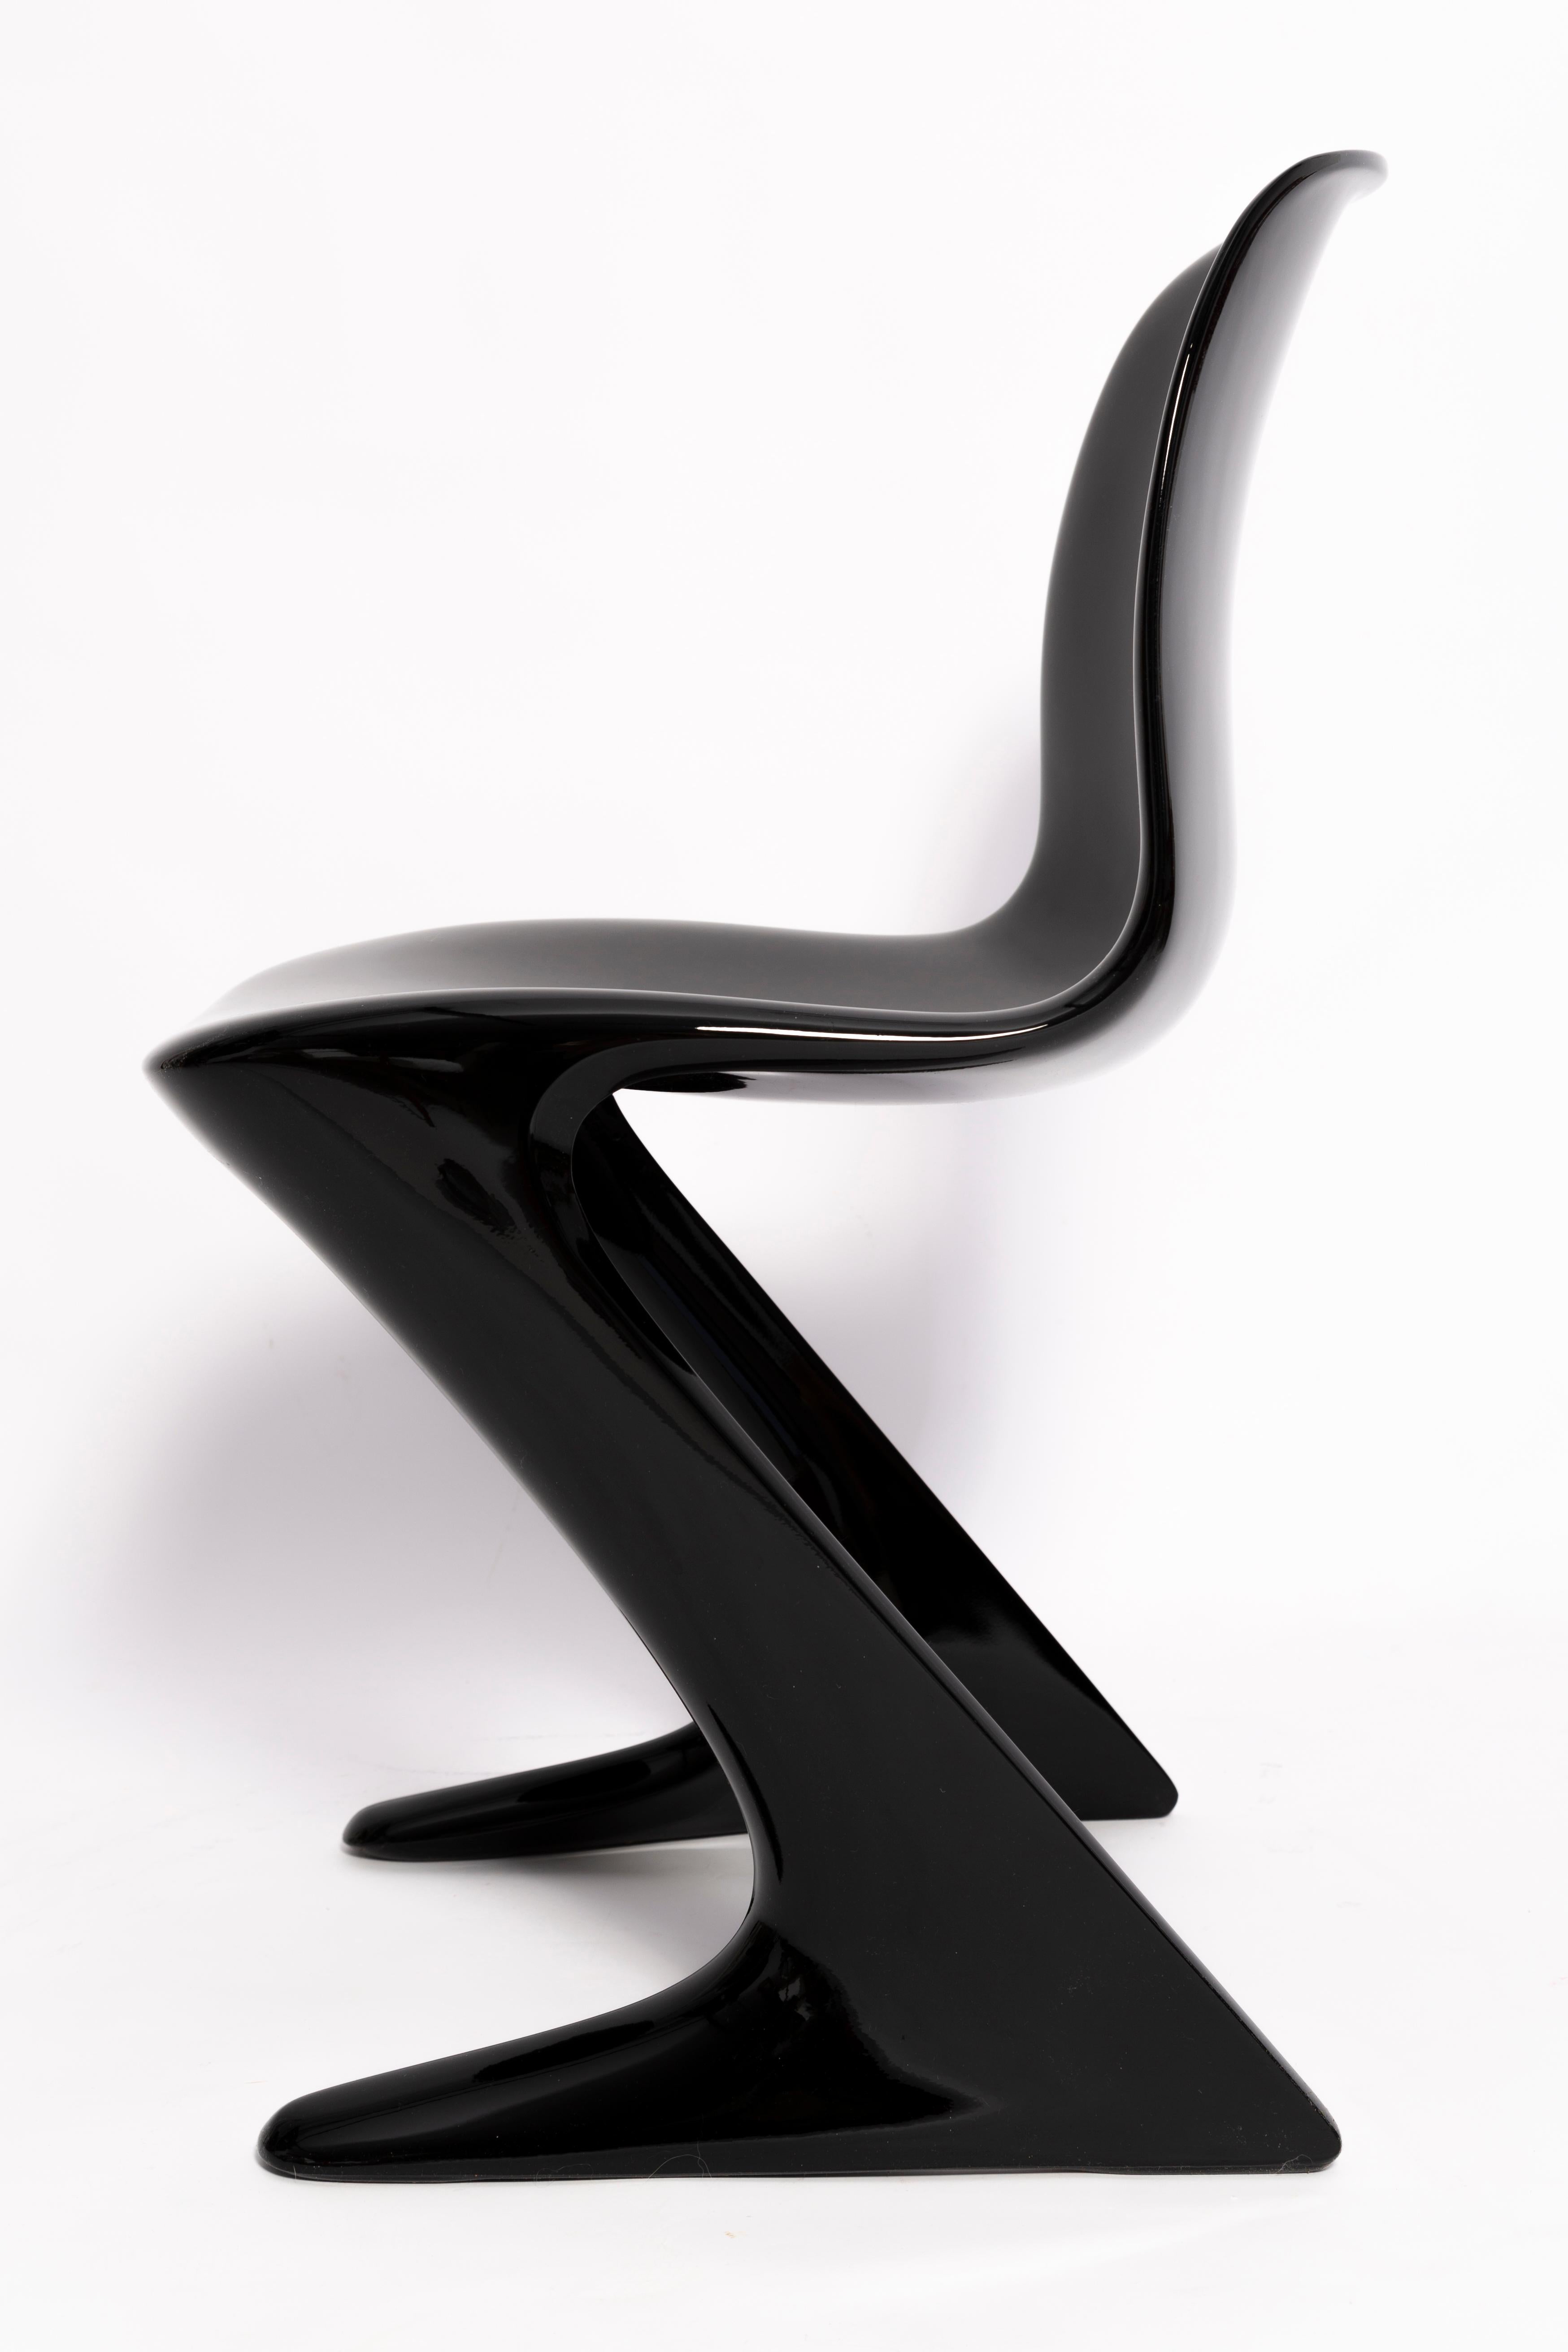 20th Century Mid Century Black Glossy Kangaroo Chair Designed by Ernst Moeckl, Germany, 1960s For Sale